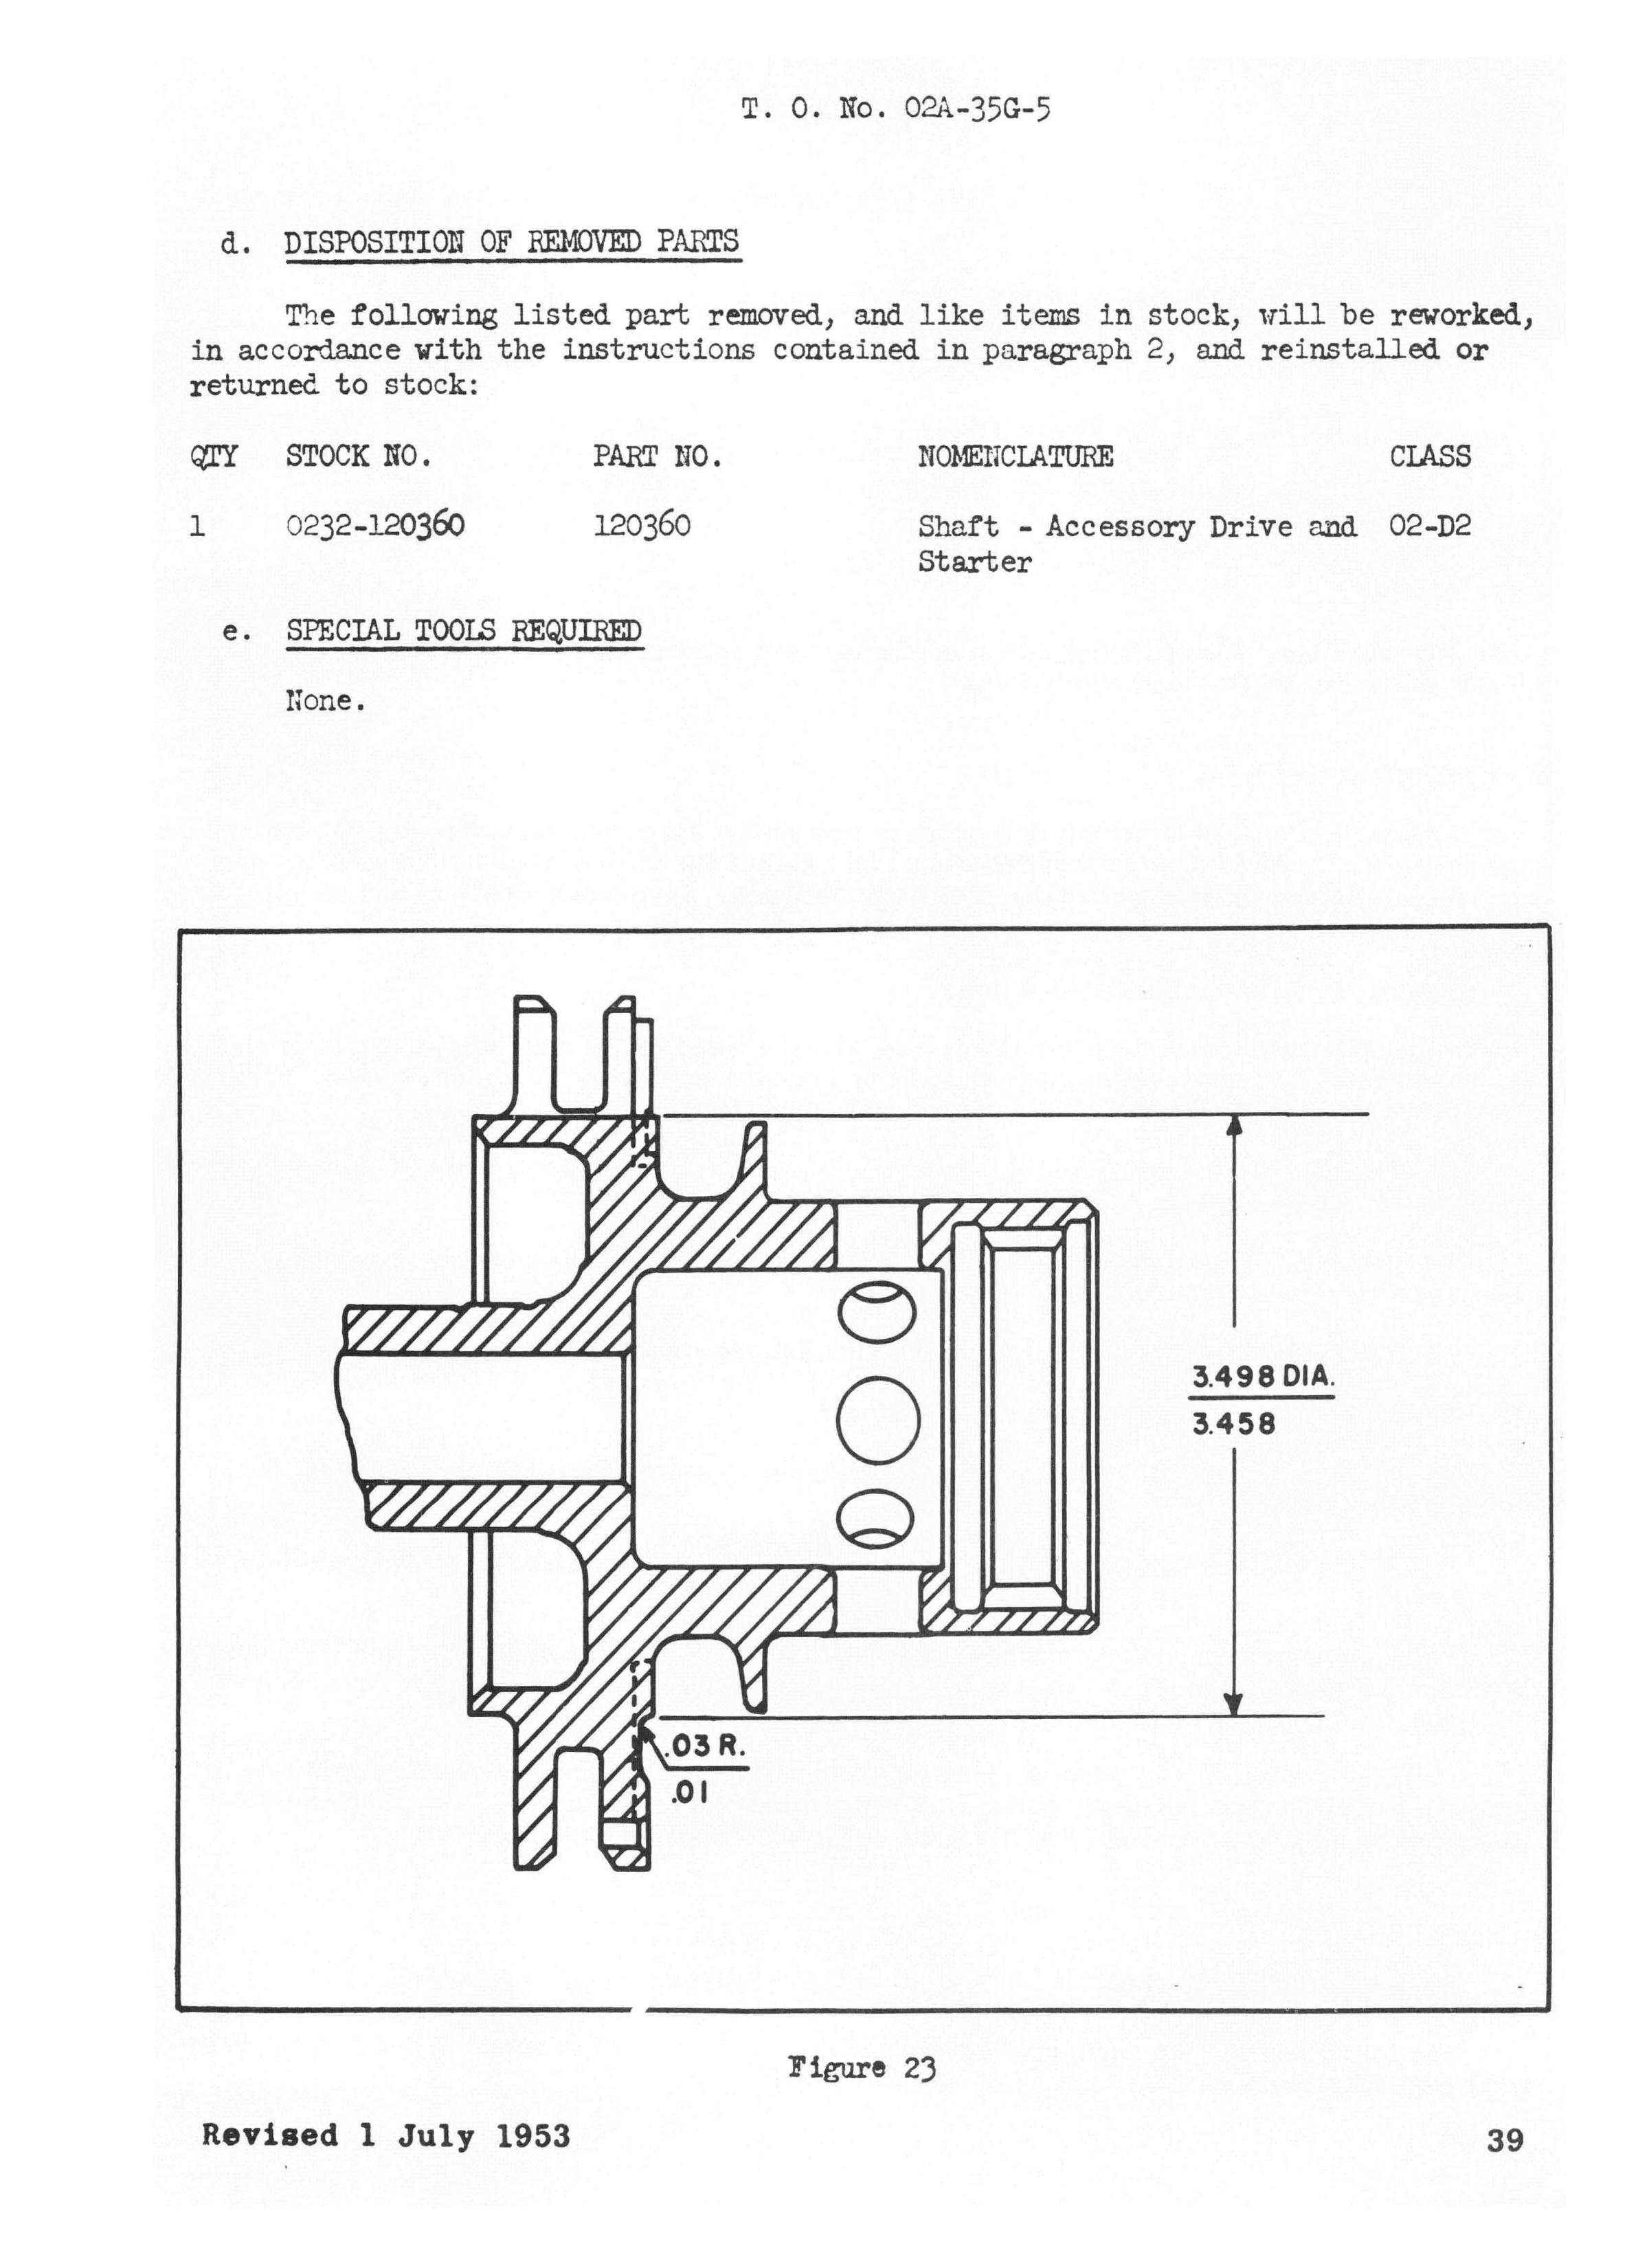 Sample page 3 from AirCorps Library document: Overhaul Changes Applicable to Wright R-1820 Series Engines